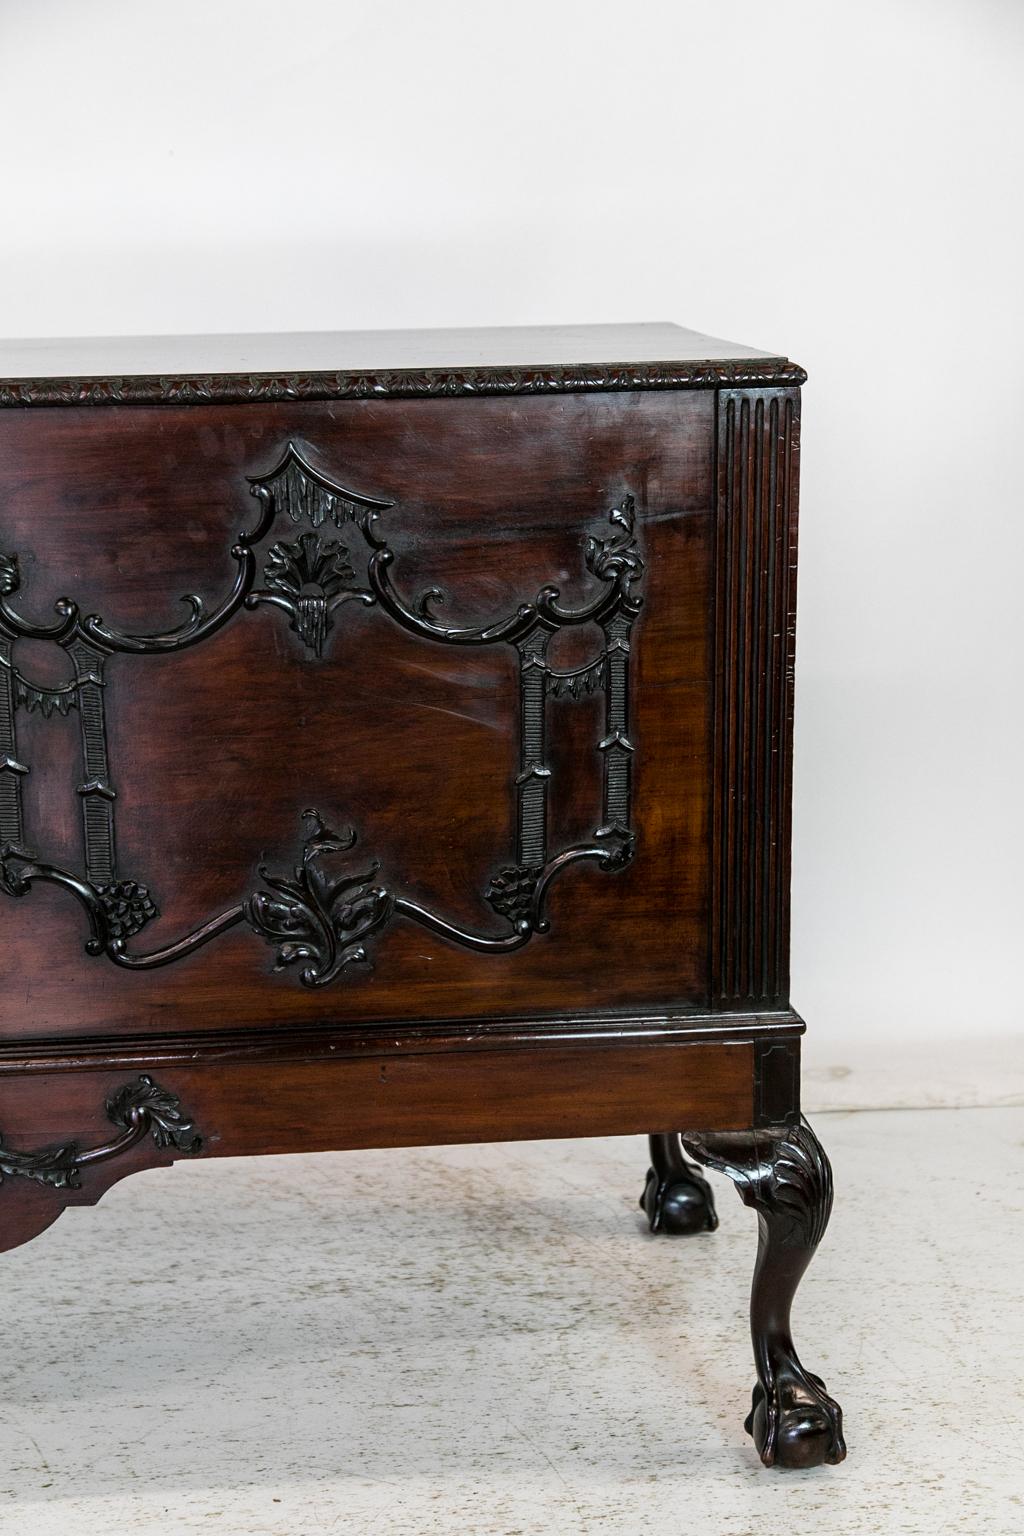 The top of this carved English mahogany blanket chest on legs has a carved edge with stylized scallop shells and waves. The front is carved with raised Rococo double cartouches. The bottom apron has a large stylized shell in the center. The legs